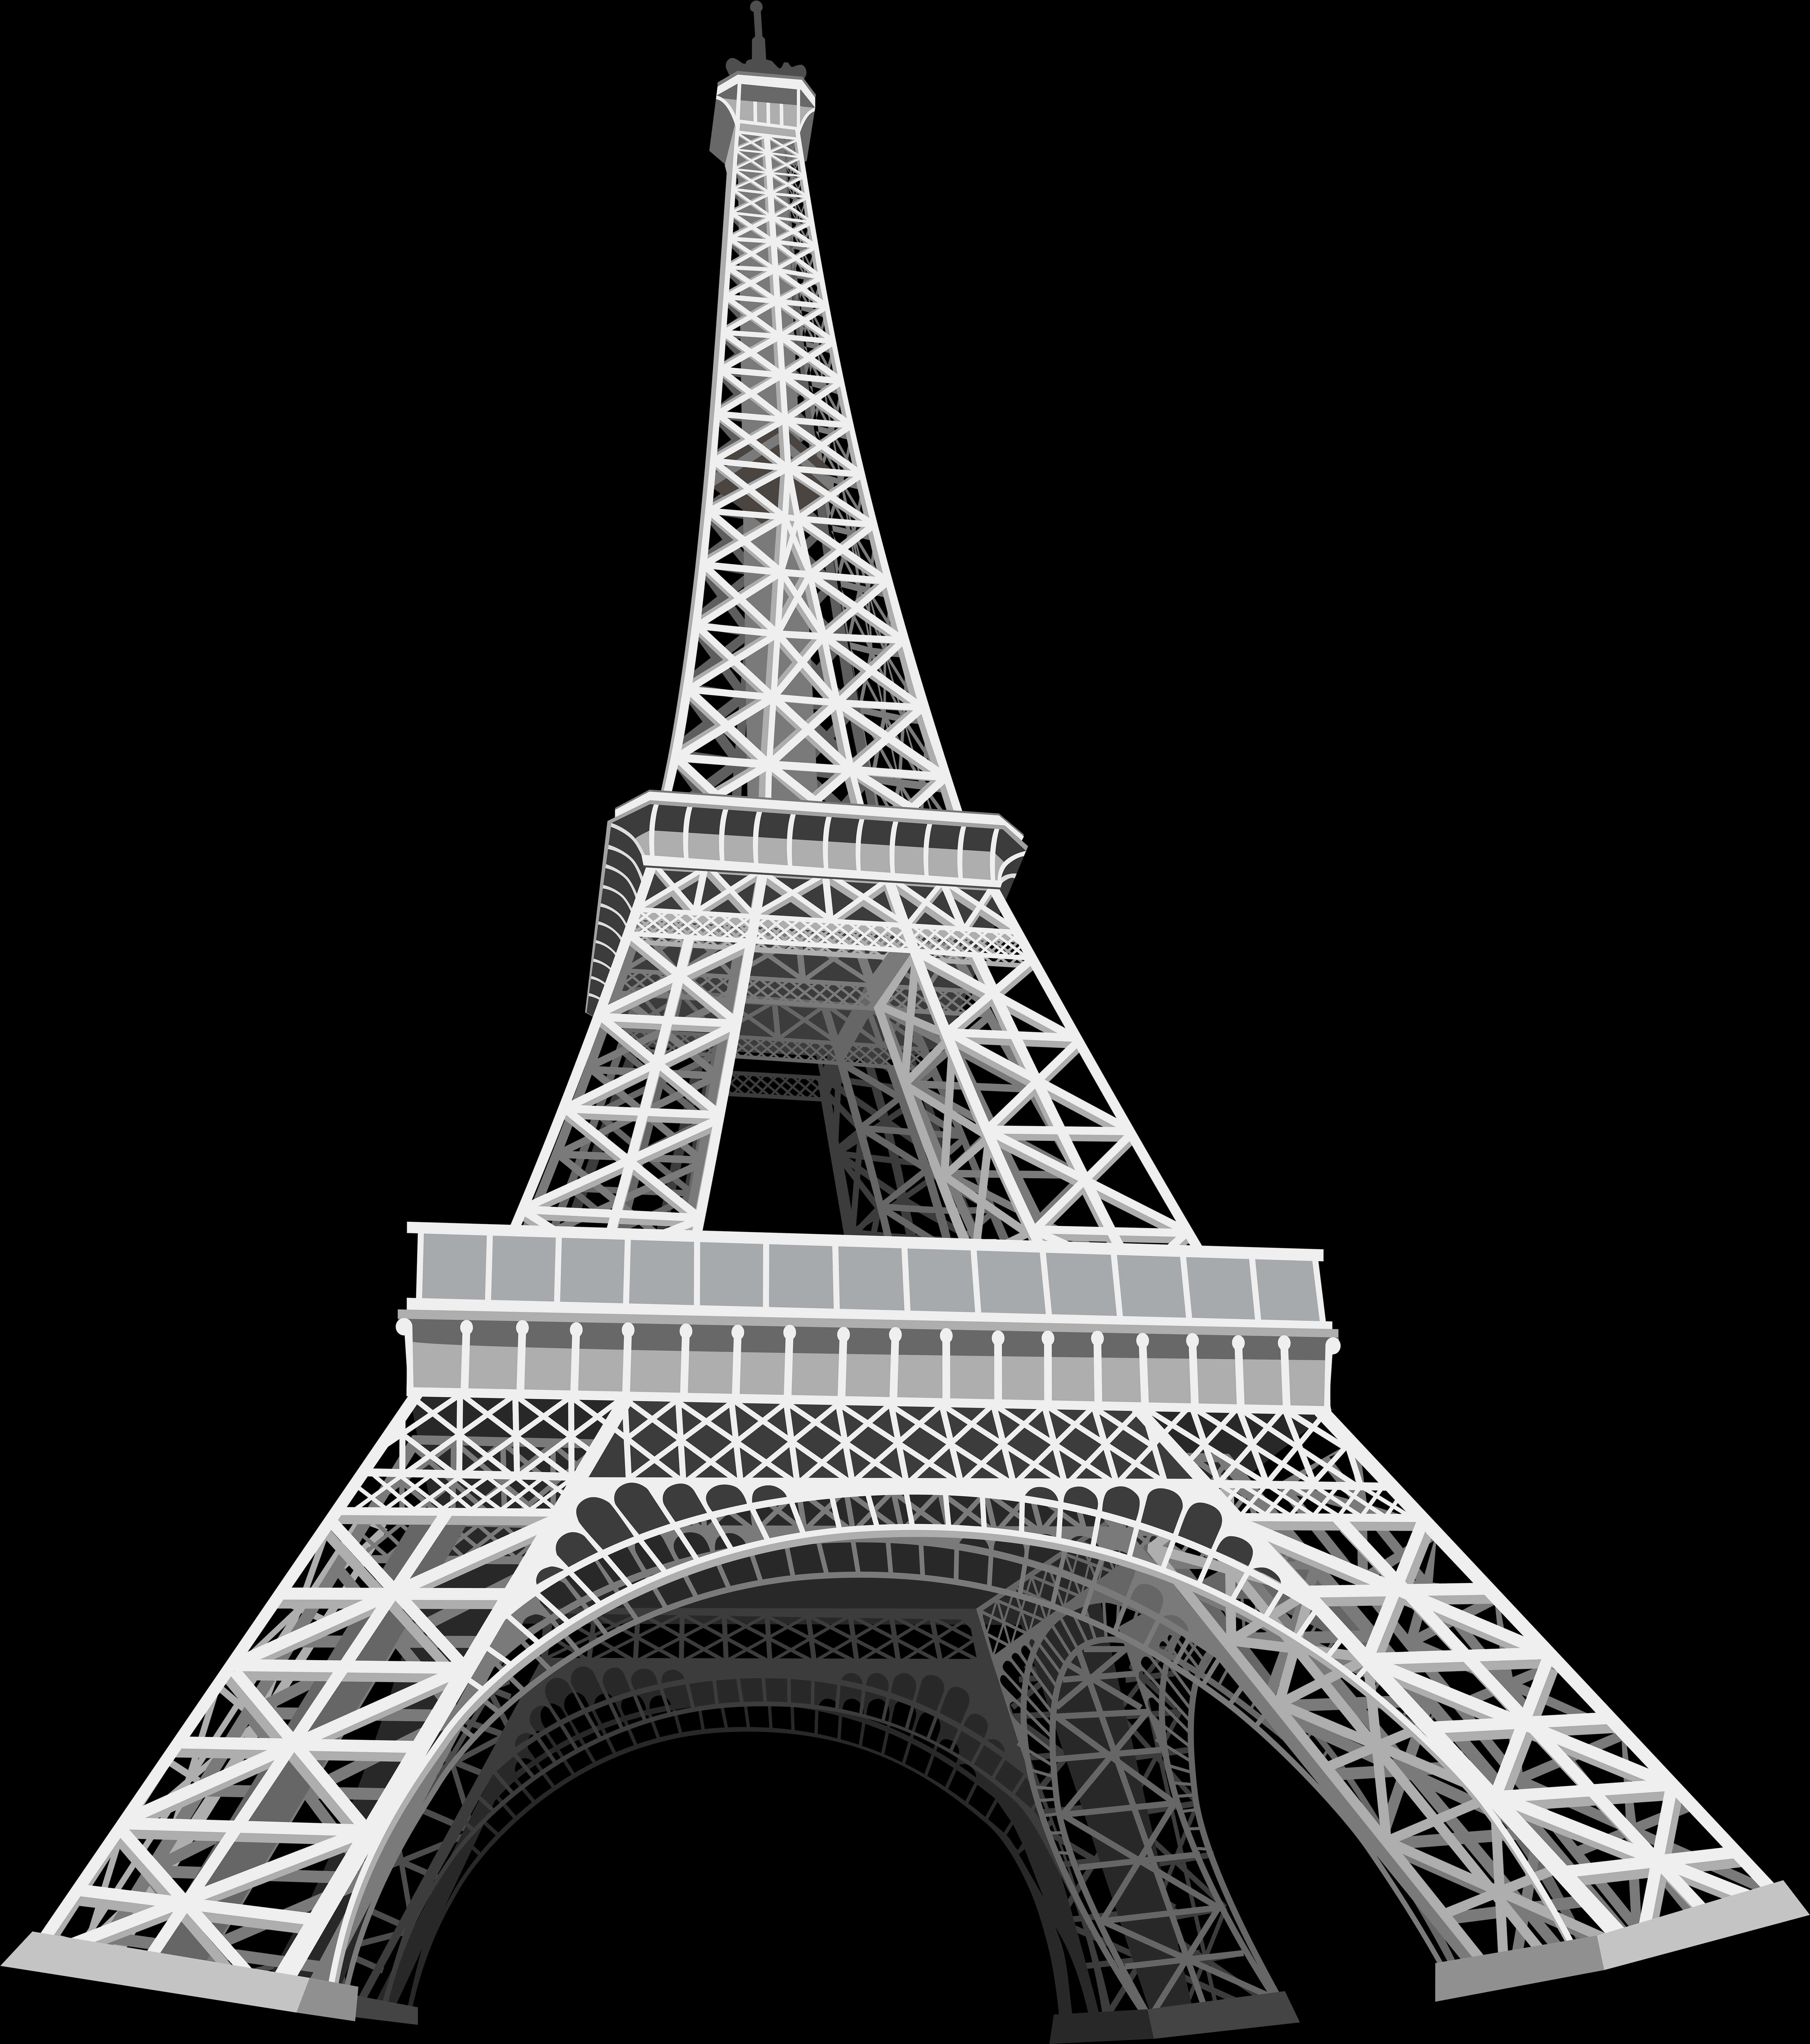 A White Metal Tower With A Black Background With Eiffel Tower In The Background